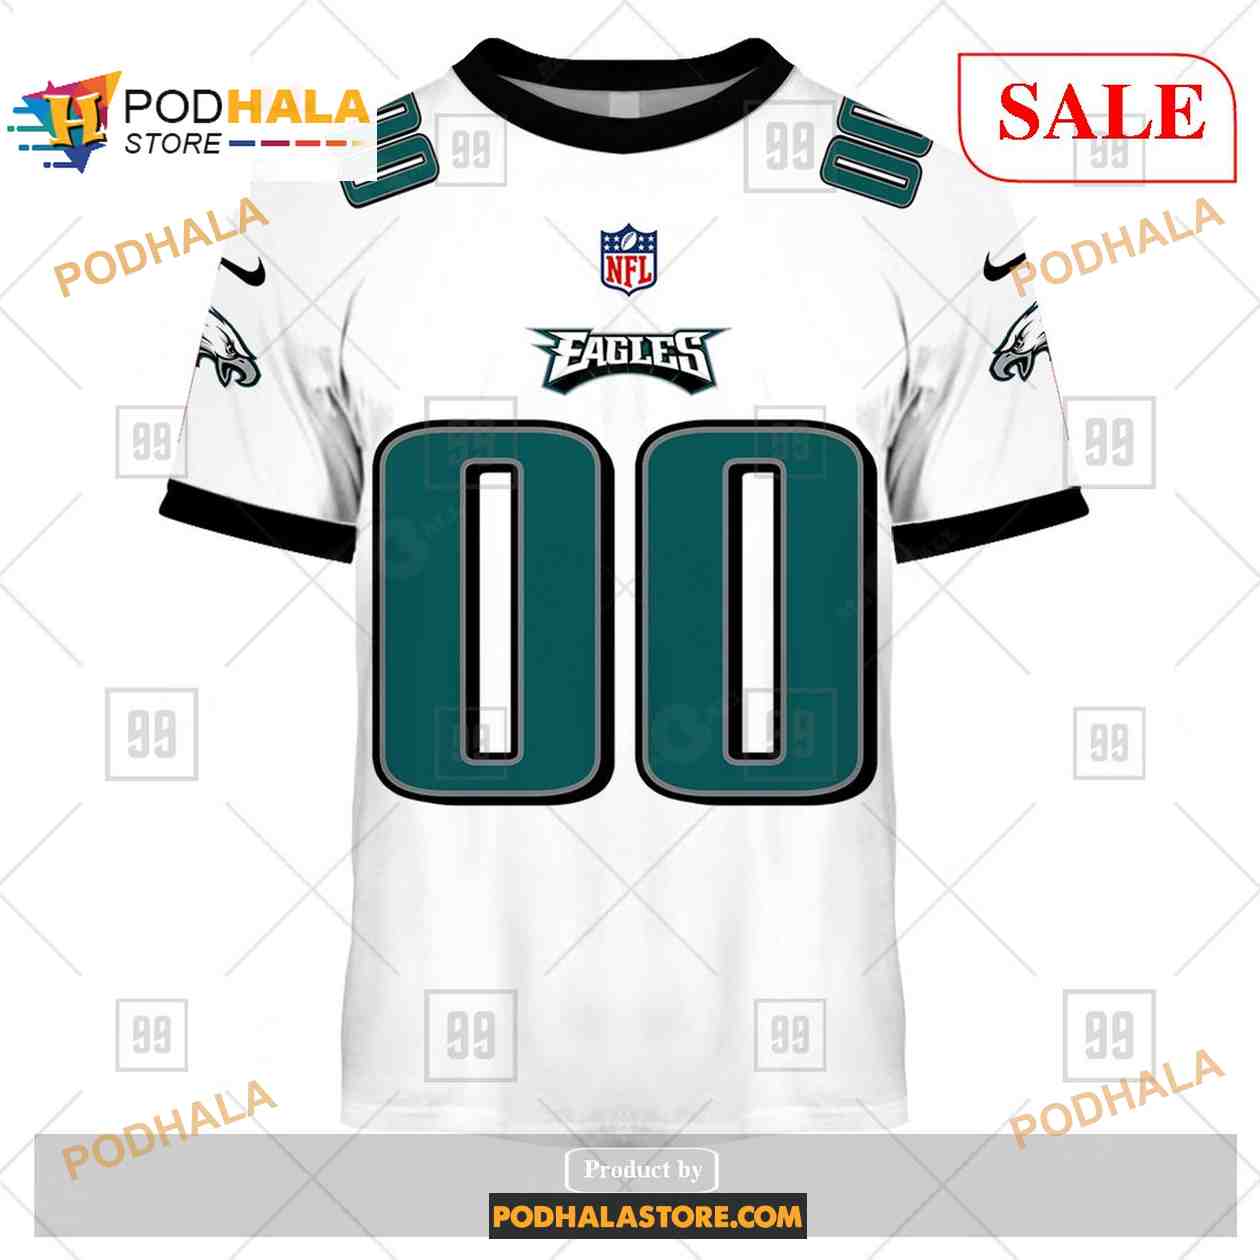 Best places in Philly to get Eagles Super Bowl jerseys, hoodies